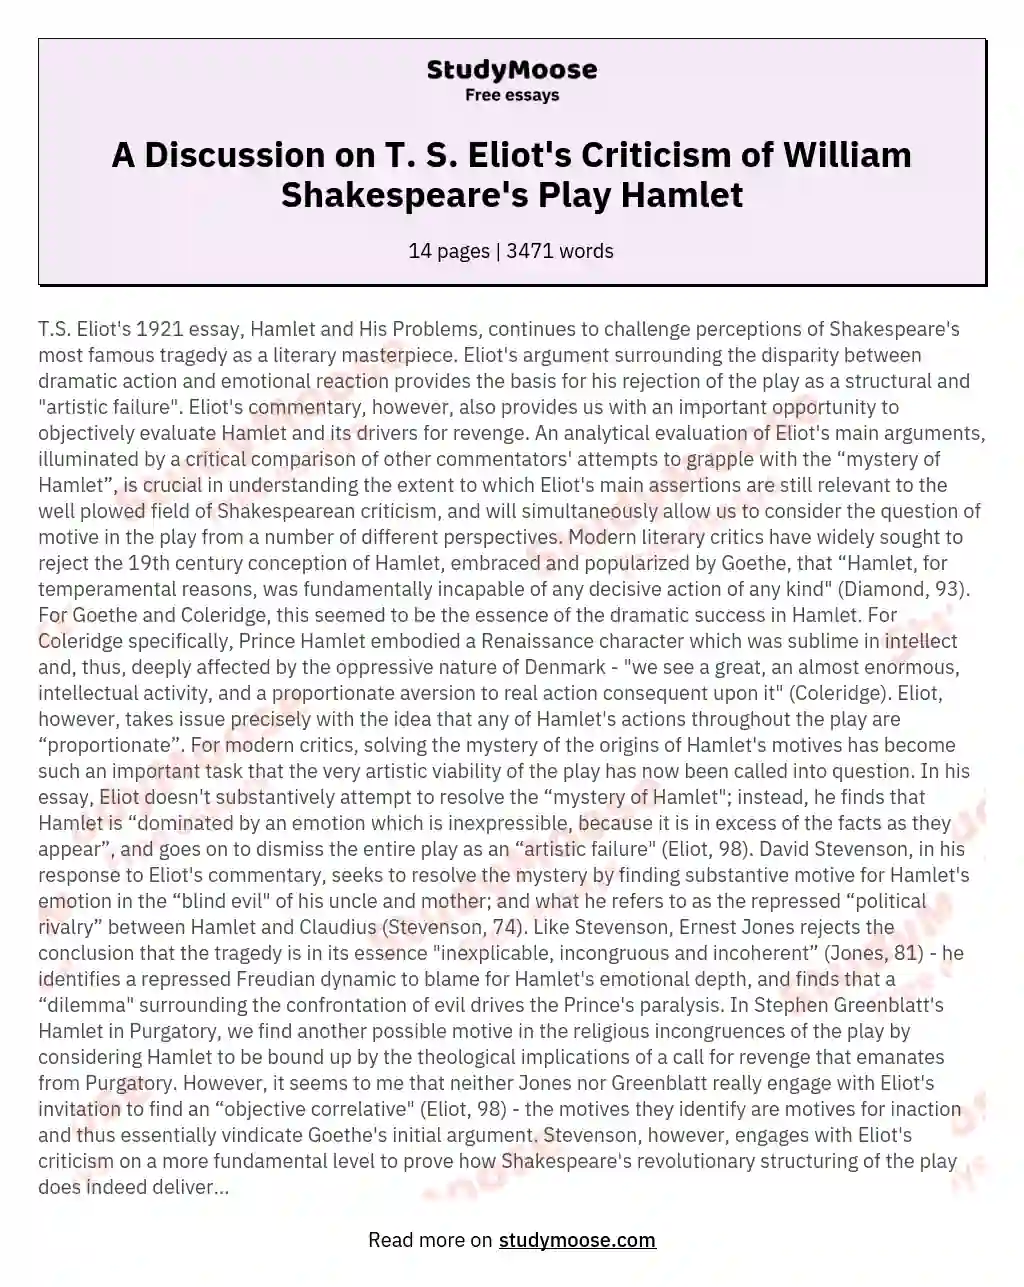 A Discussion on T. S. Eliot's Criticism of William Shakespeare's Play Hamlet